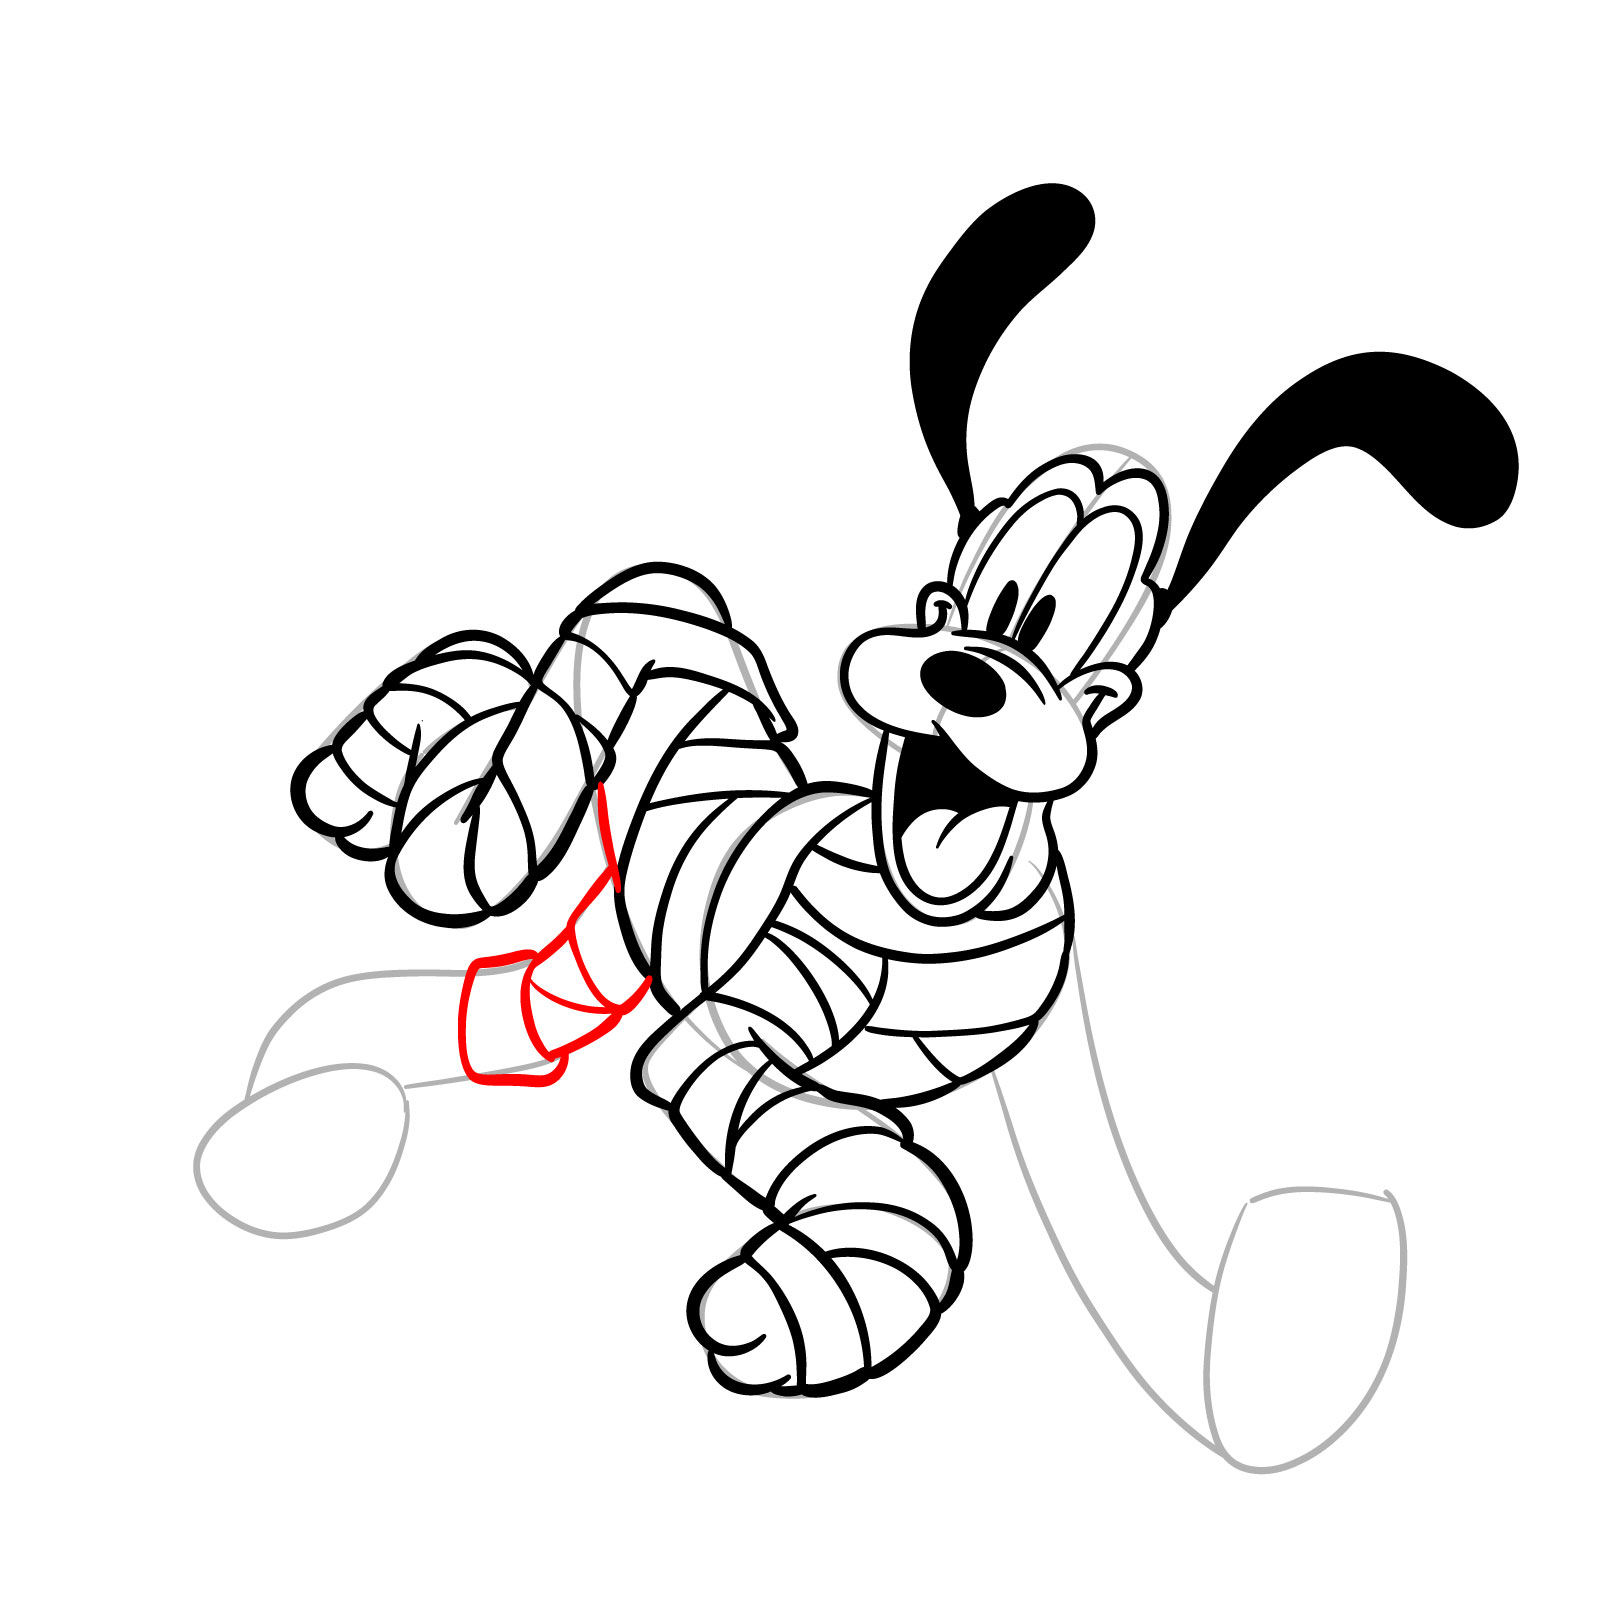 How to draw Halloween Pluto as a mummy - step 21